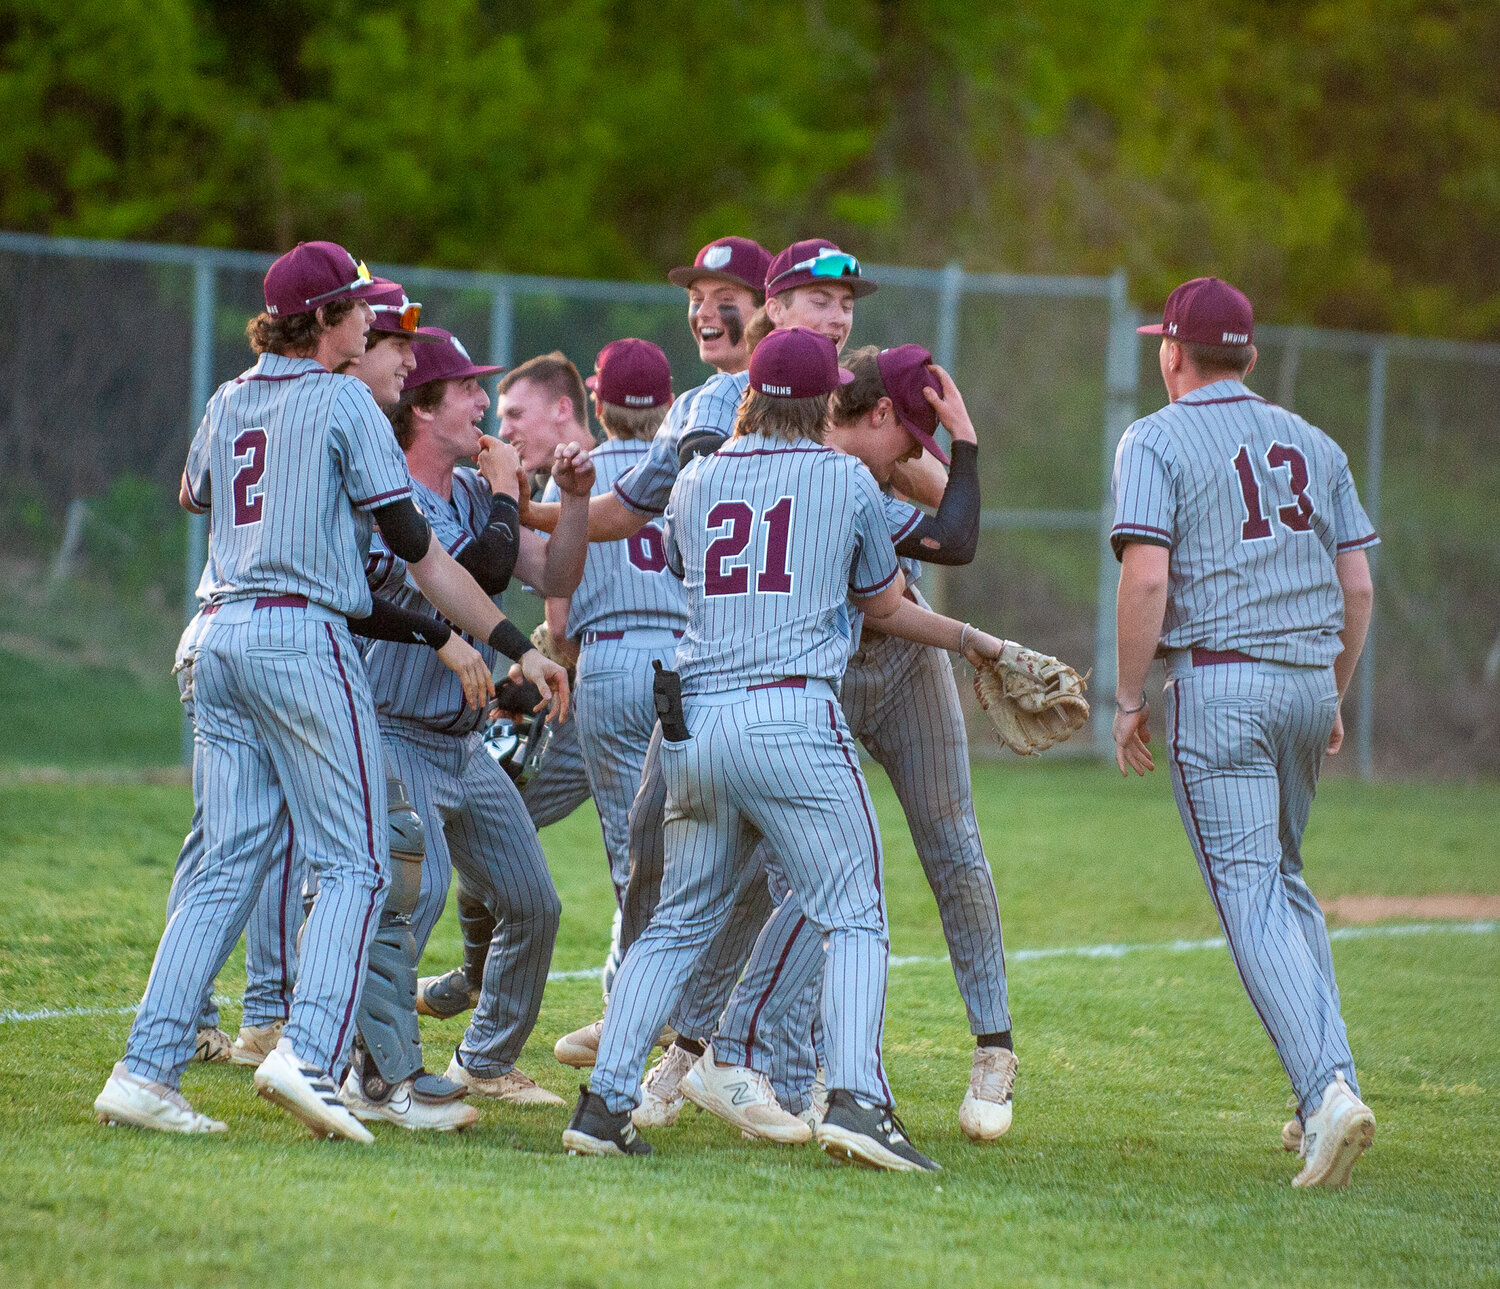 Broadneck celebrated after beating Severna Park, 8-7, in extra innings.